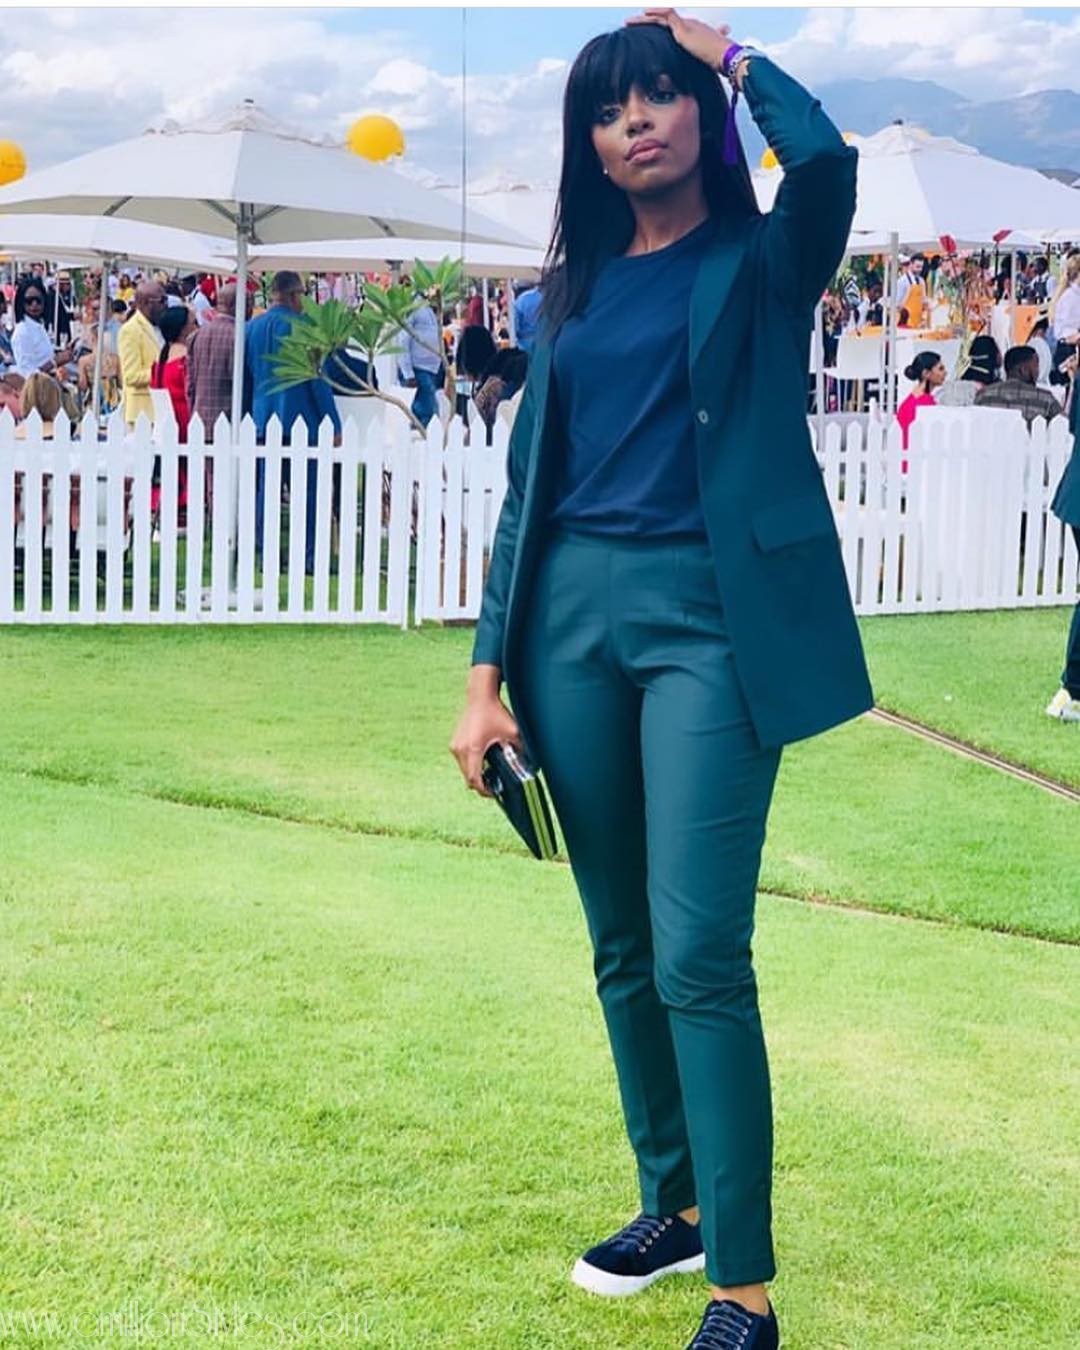 Fashionable Suits Worn By Women At The 2019 Veuve Clicquot Masters Polo